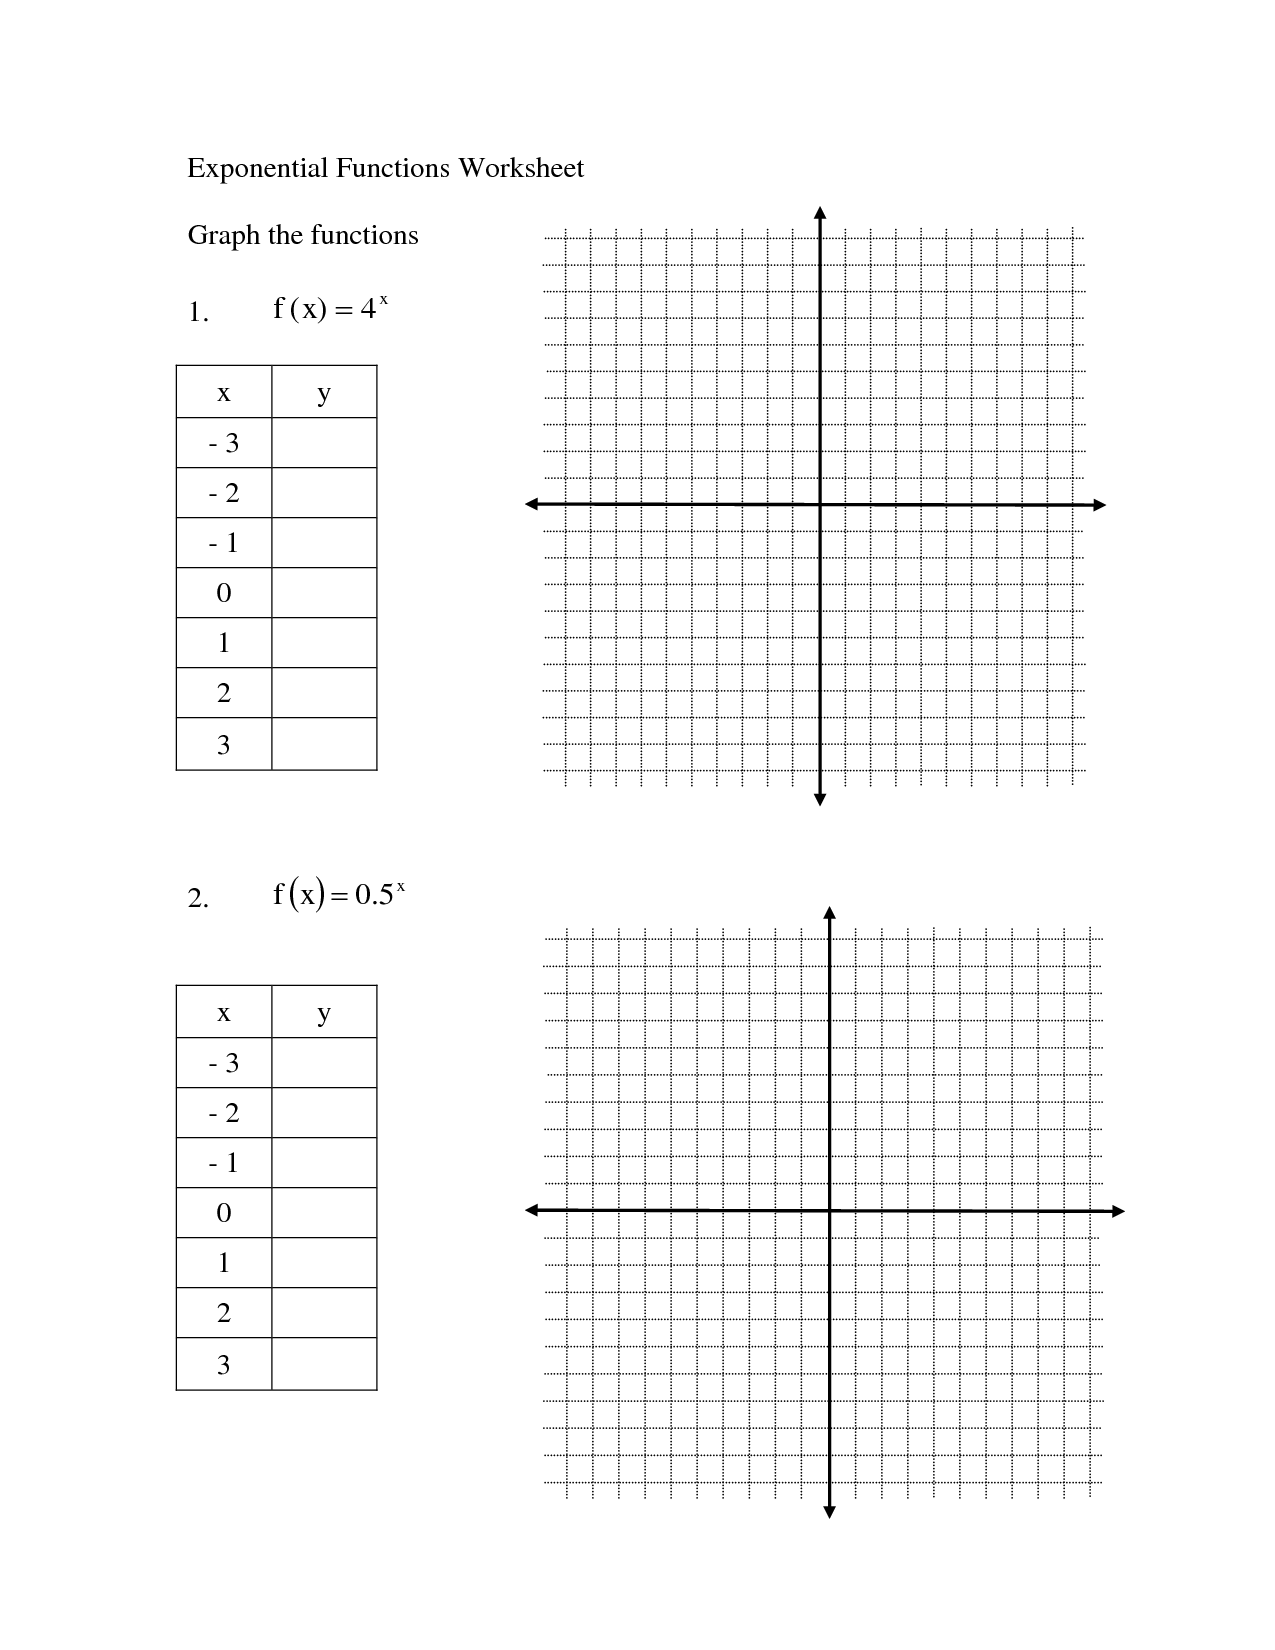 15-best-images-of-graphing-functions-worksheet-for-7th-8th-grade-math